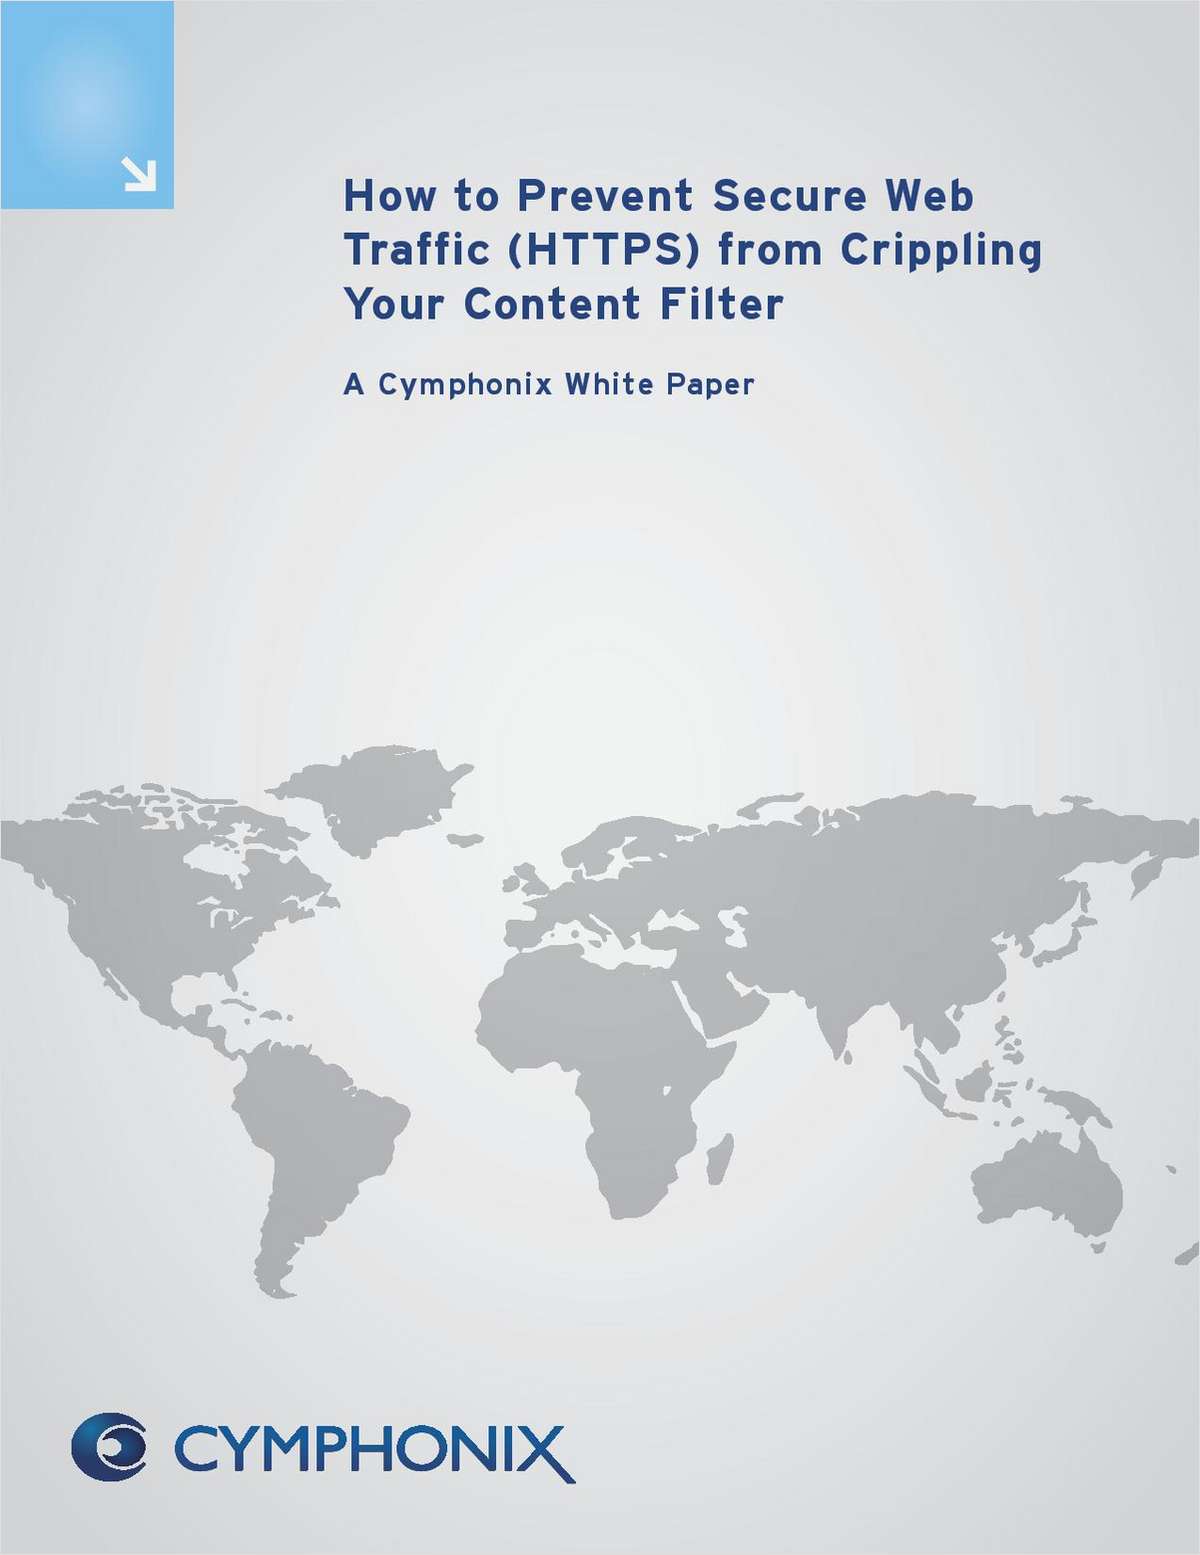 How to Prevent HTTPS Traffic from Crippling Your Content Filter